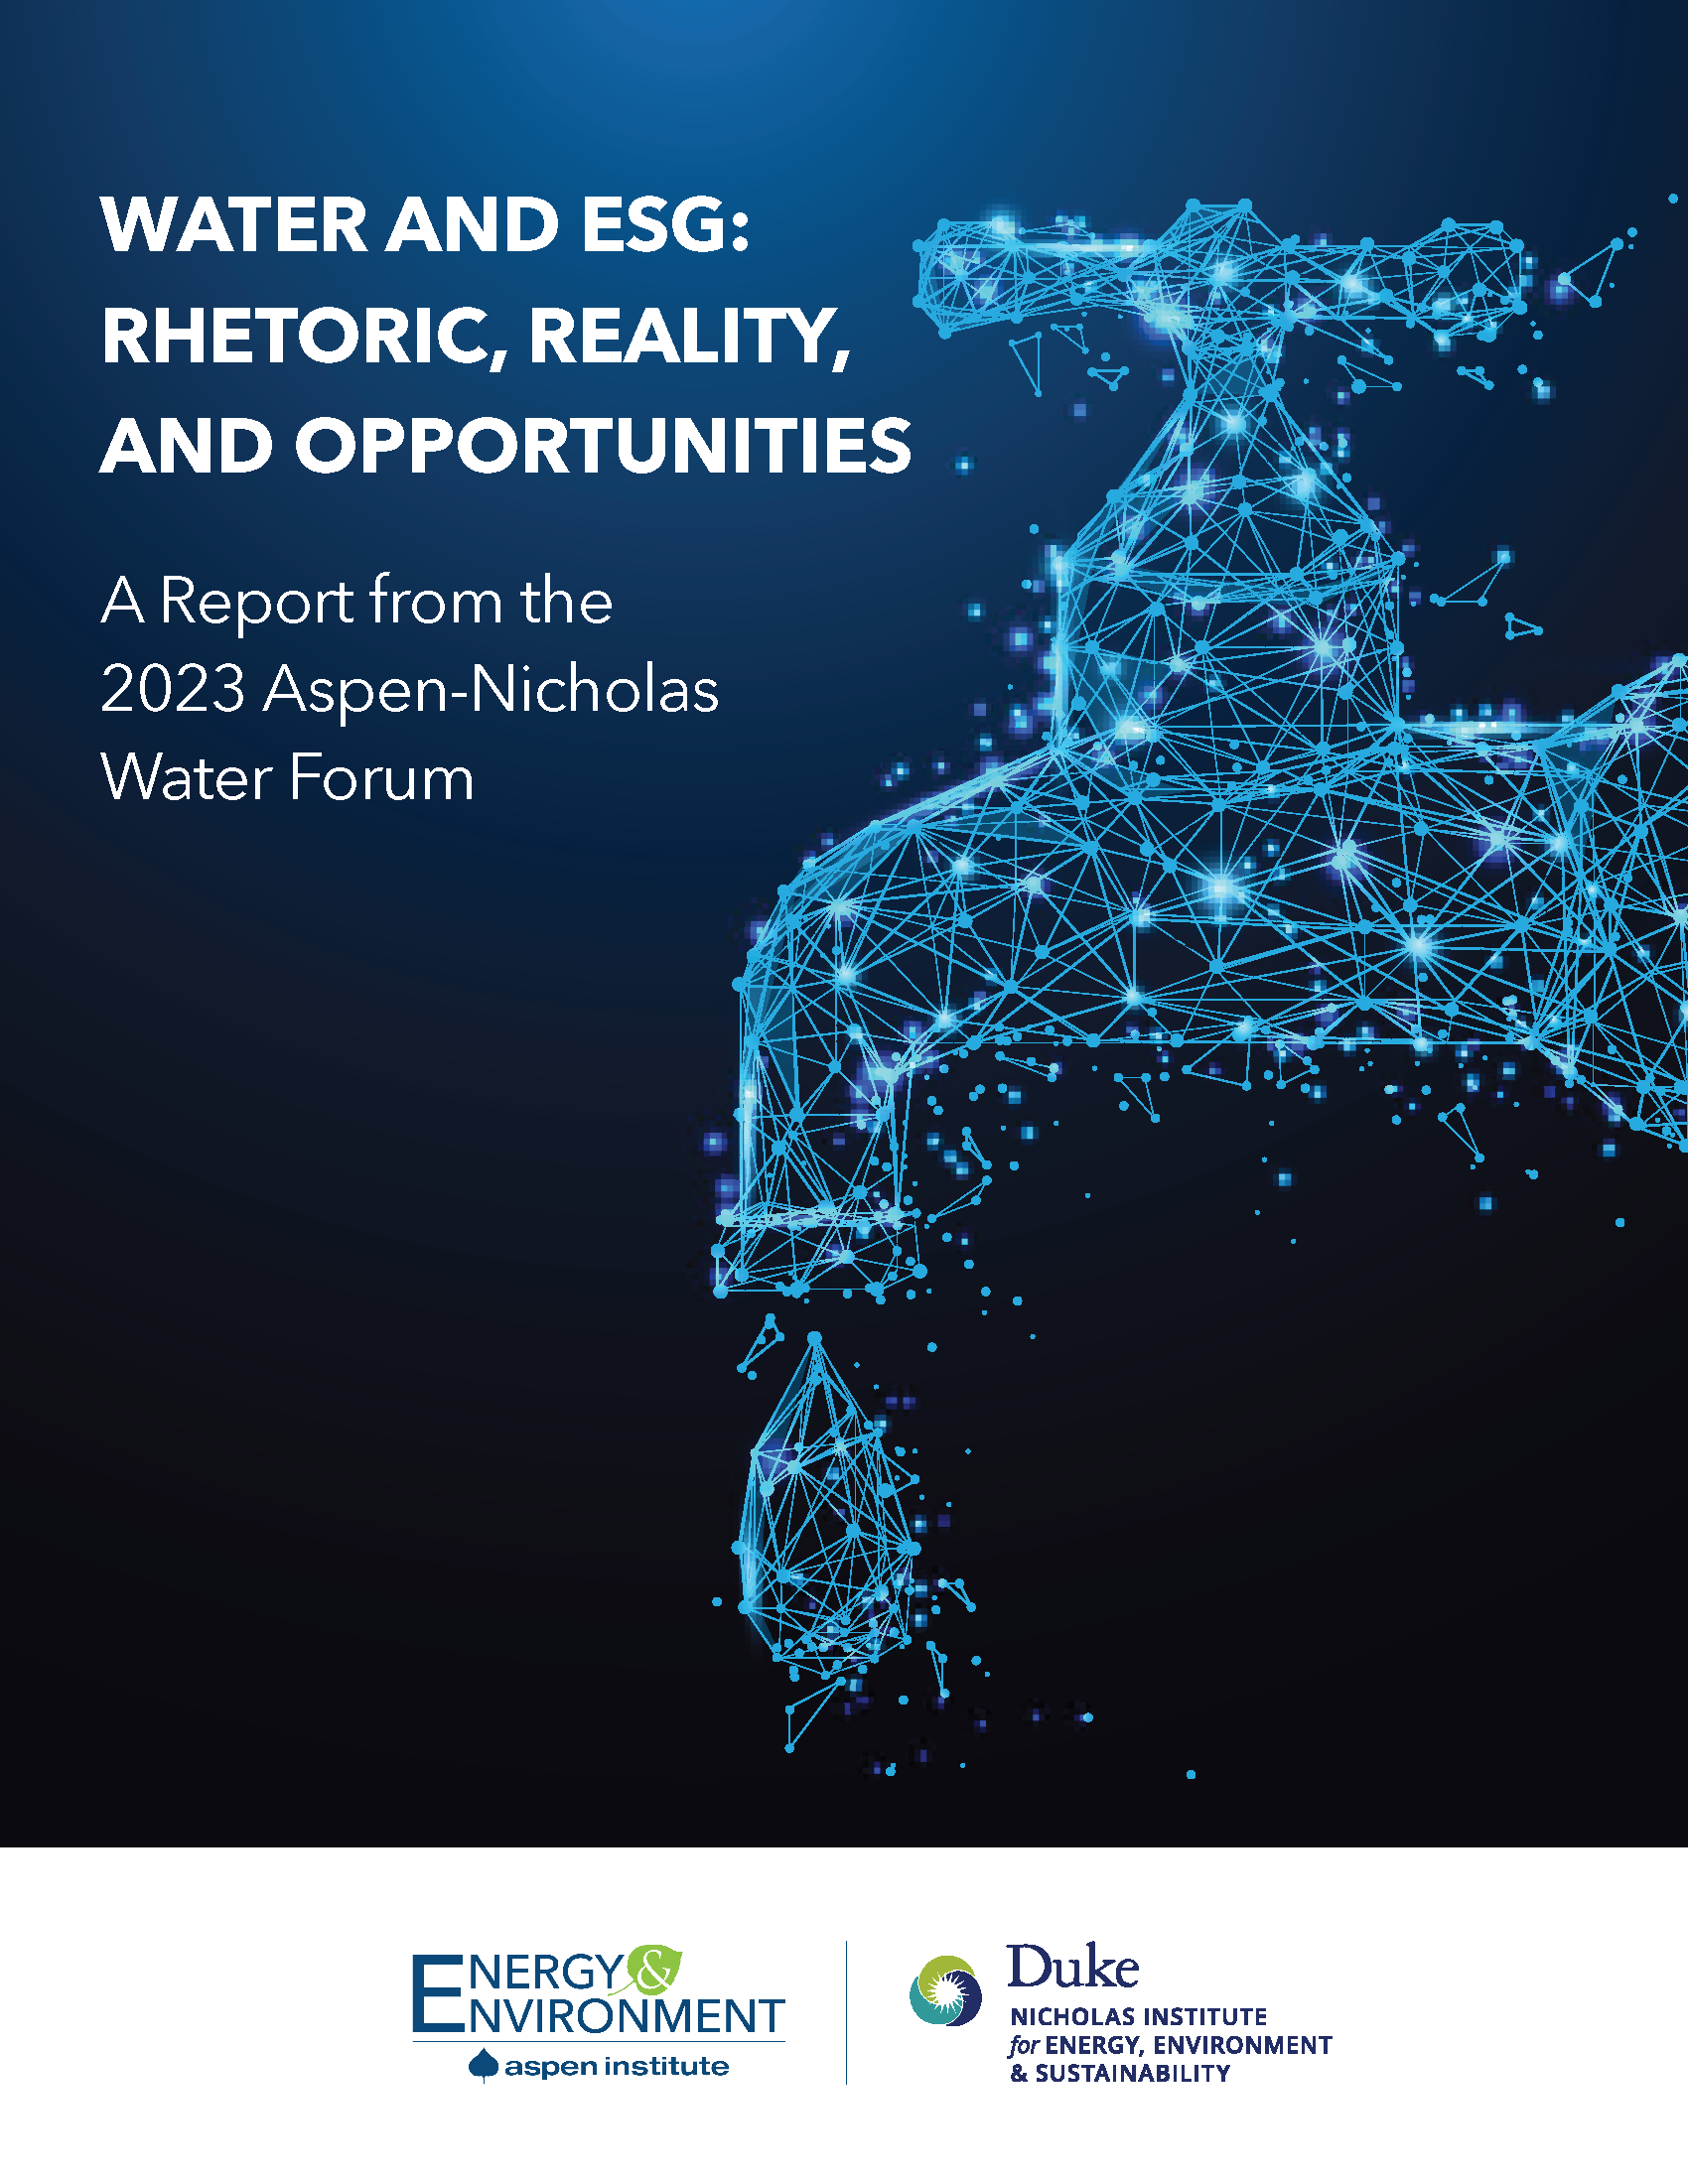 WATER AND ESG: A Report from the 2023 Aspen-Nicholas Water Forum